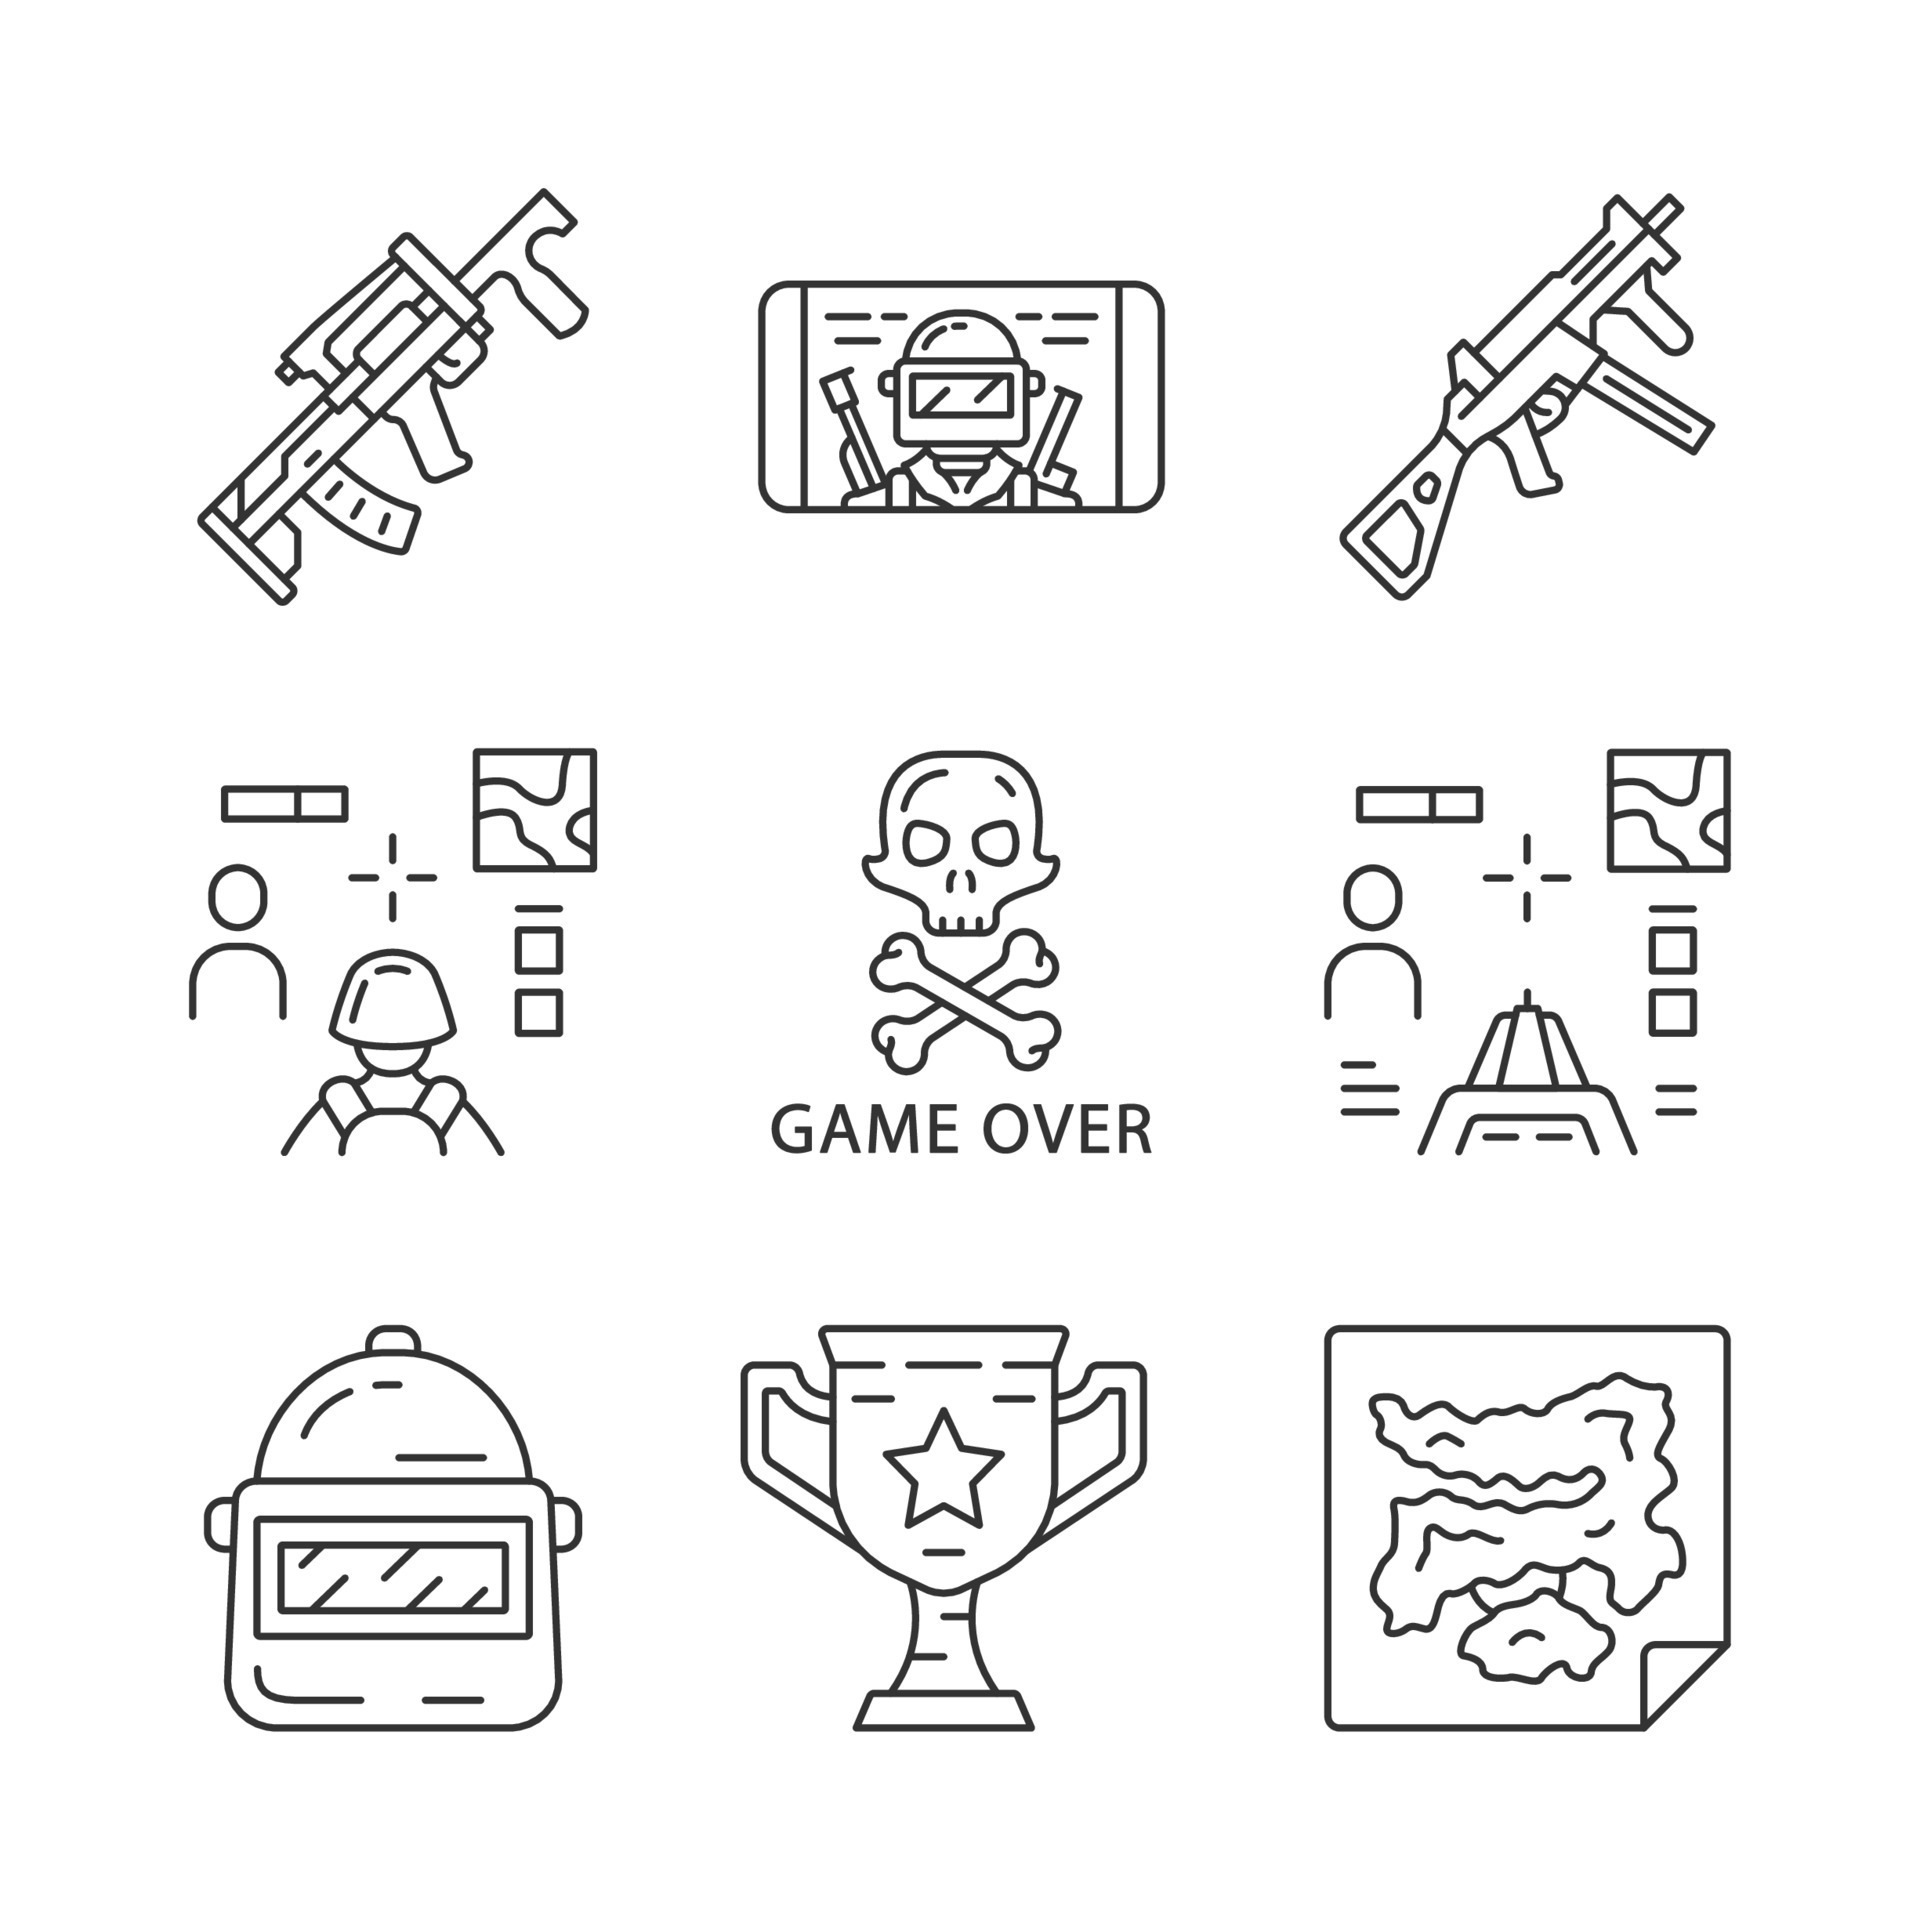 Online game linear icons set. Weapon, gun, 3d and from first person shooter, game over, map, trophy, helmet, mobile game. Thin line contour symbols